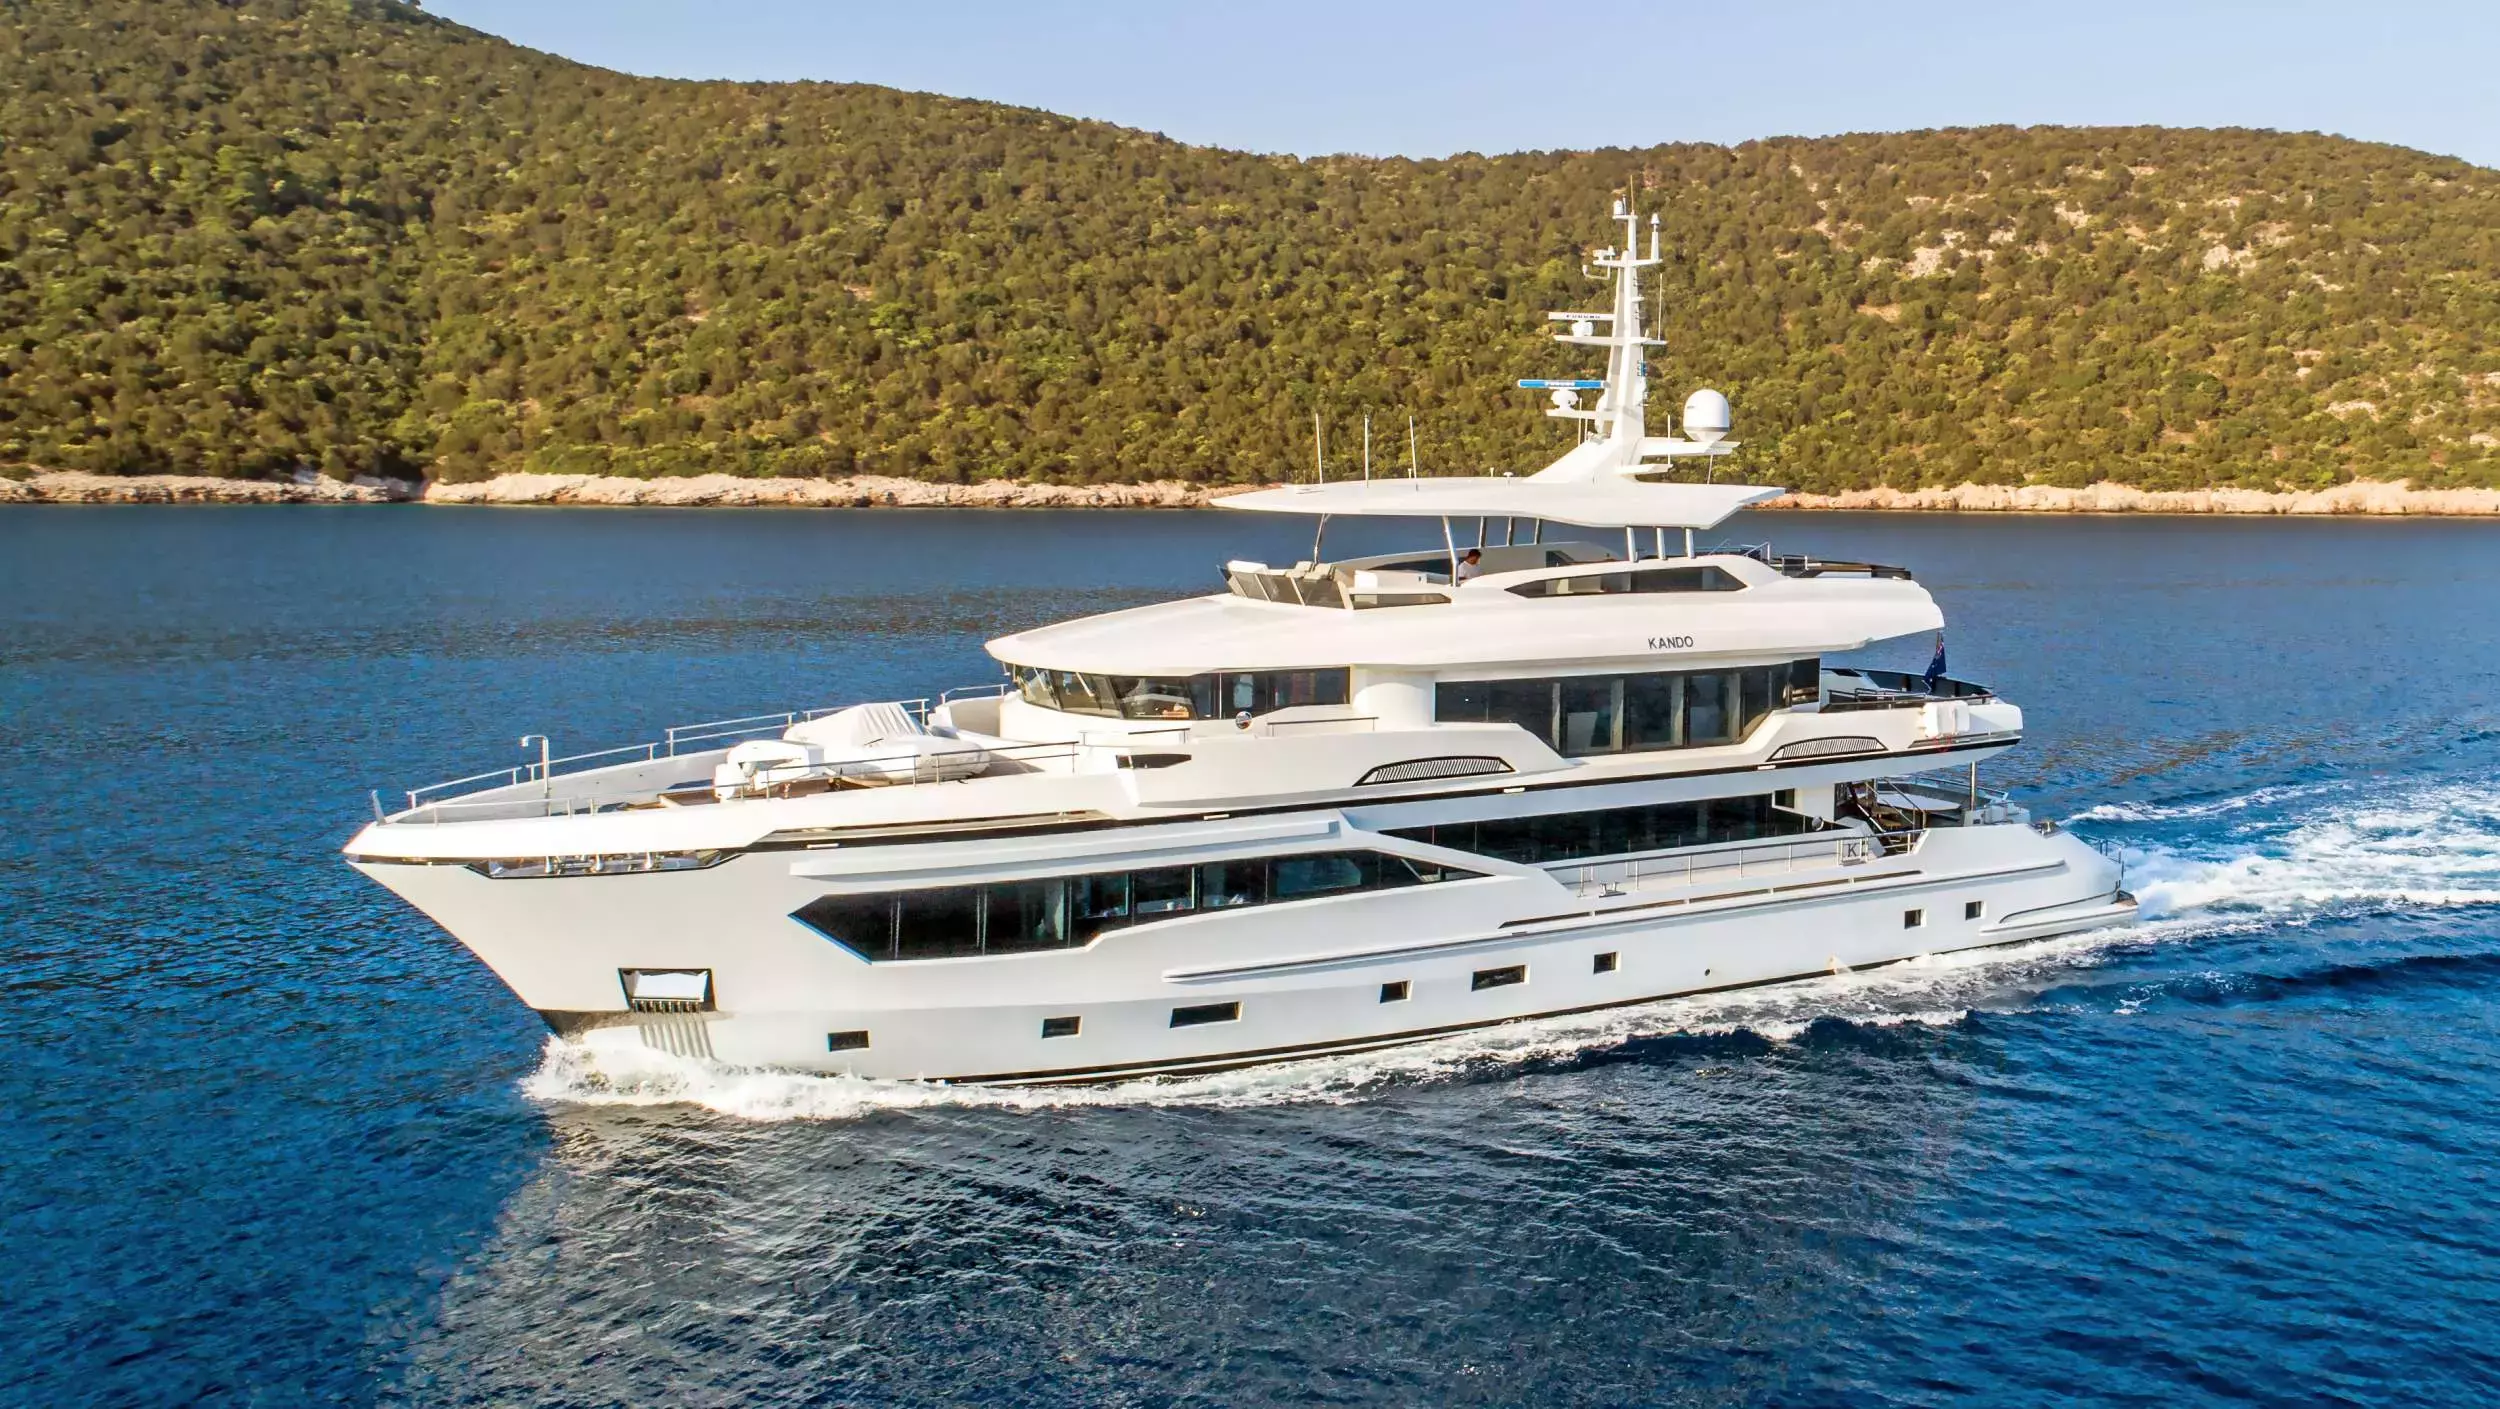 Kando by Custom Made - Top rates for a Charter of a private Motor Yacht in Cyprus